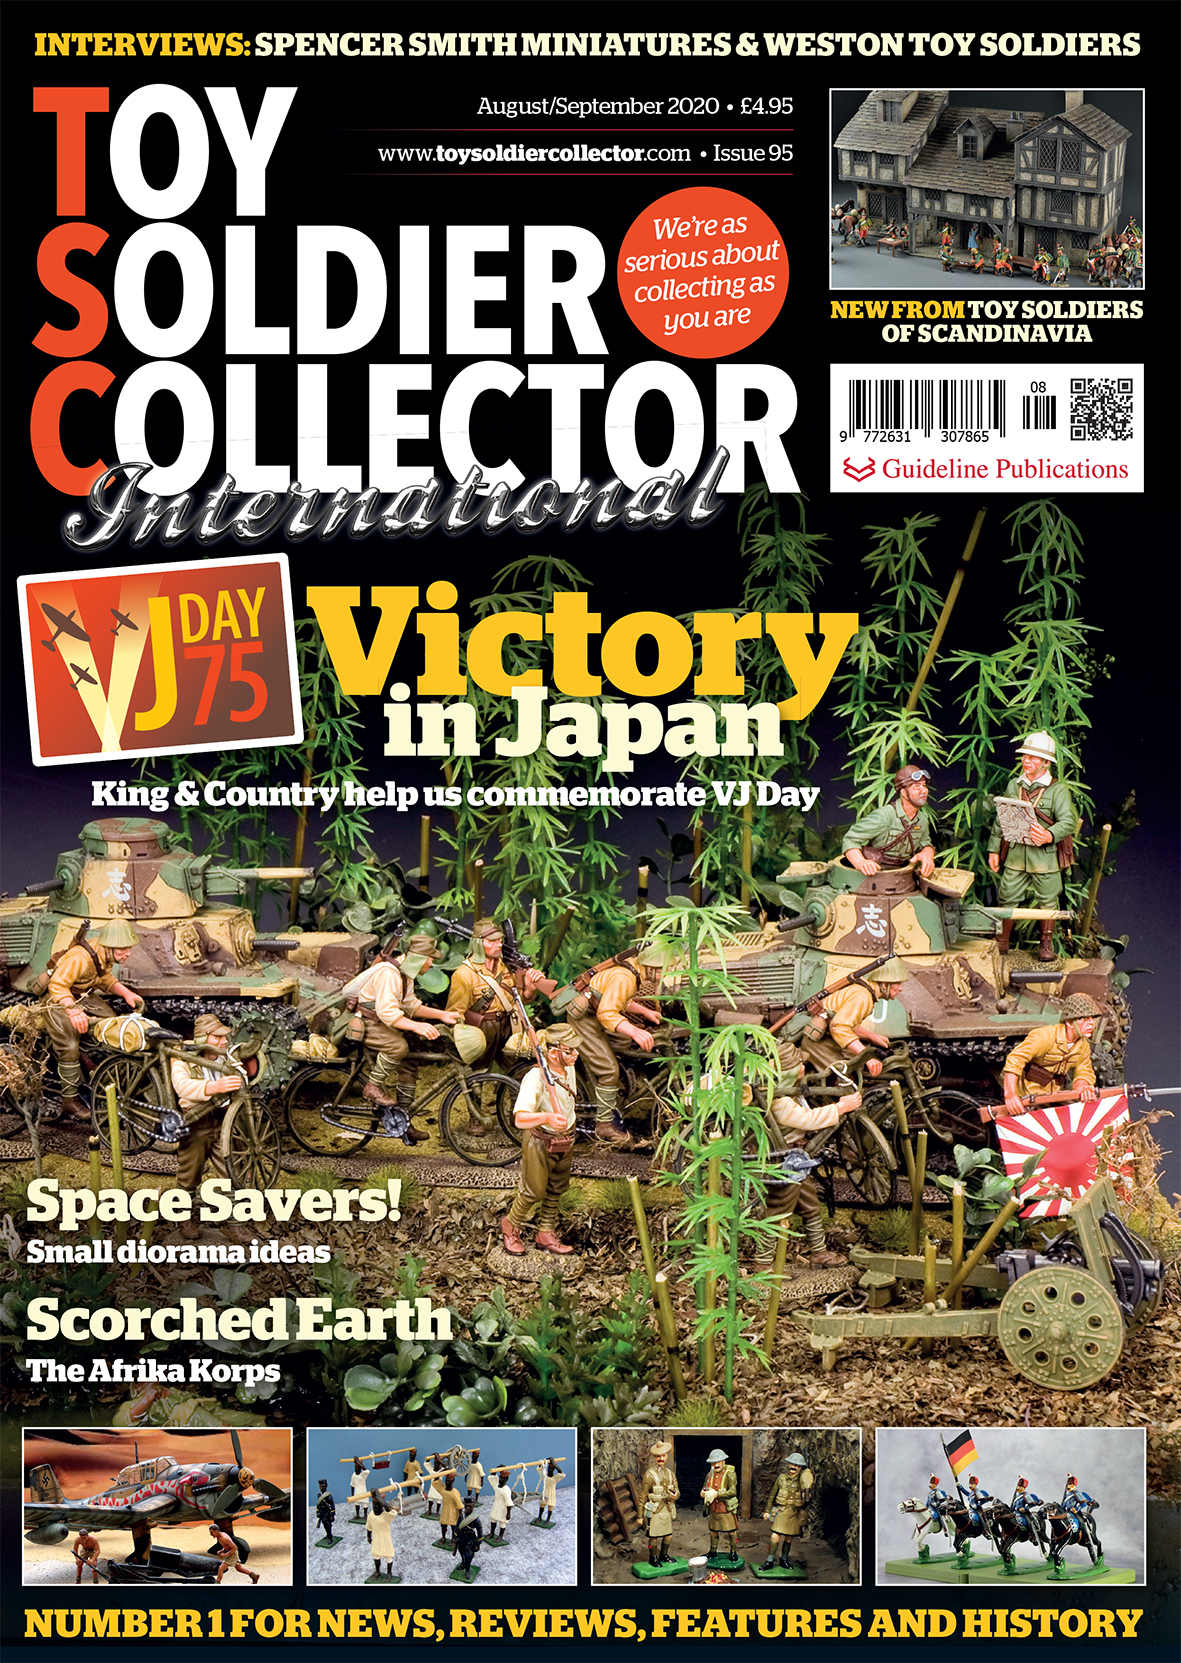 Guideline Publications Toy Soldier Collector #95 Aug/Sept 20 - Issue 95 